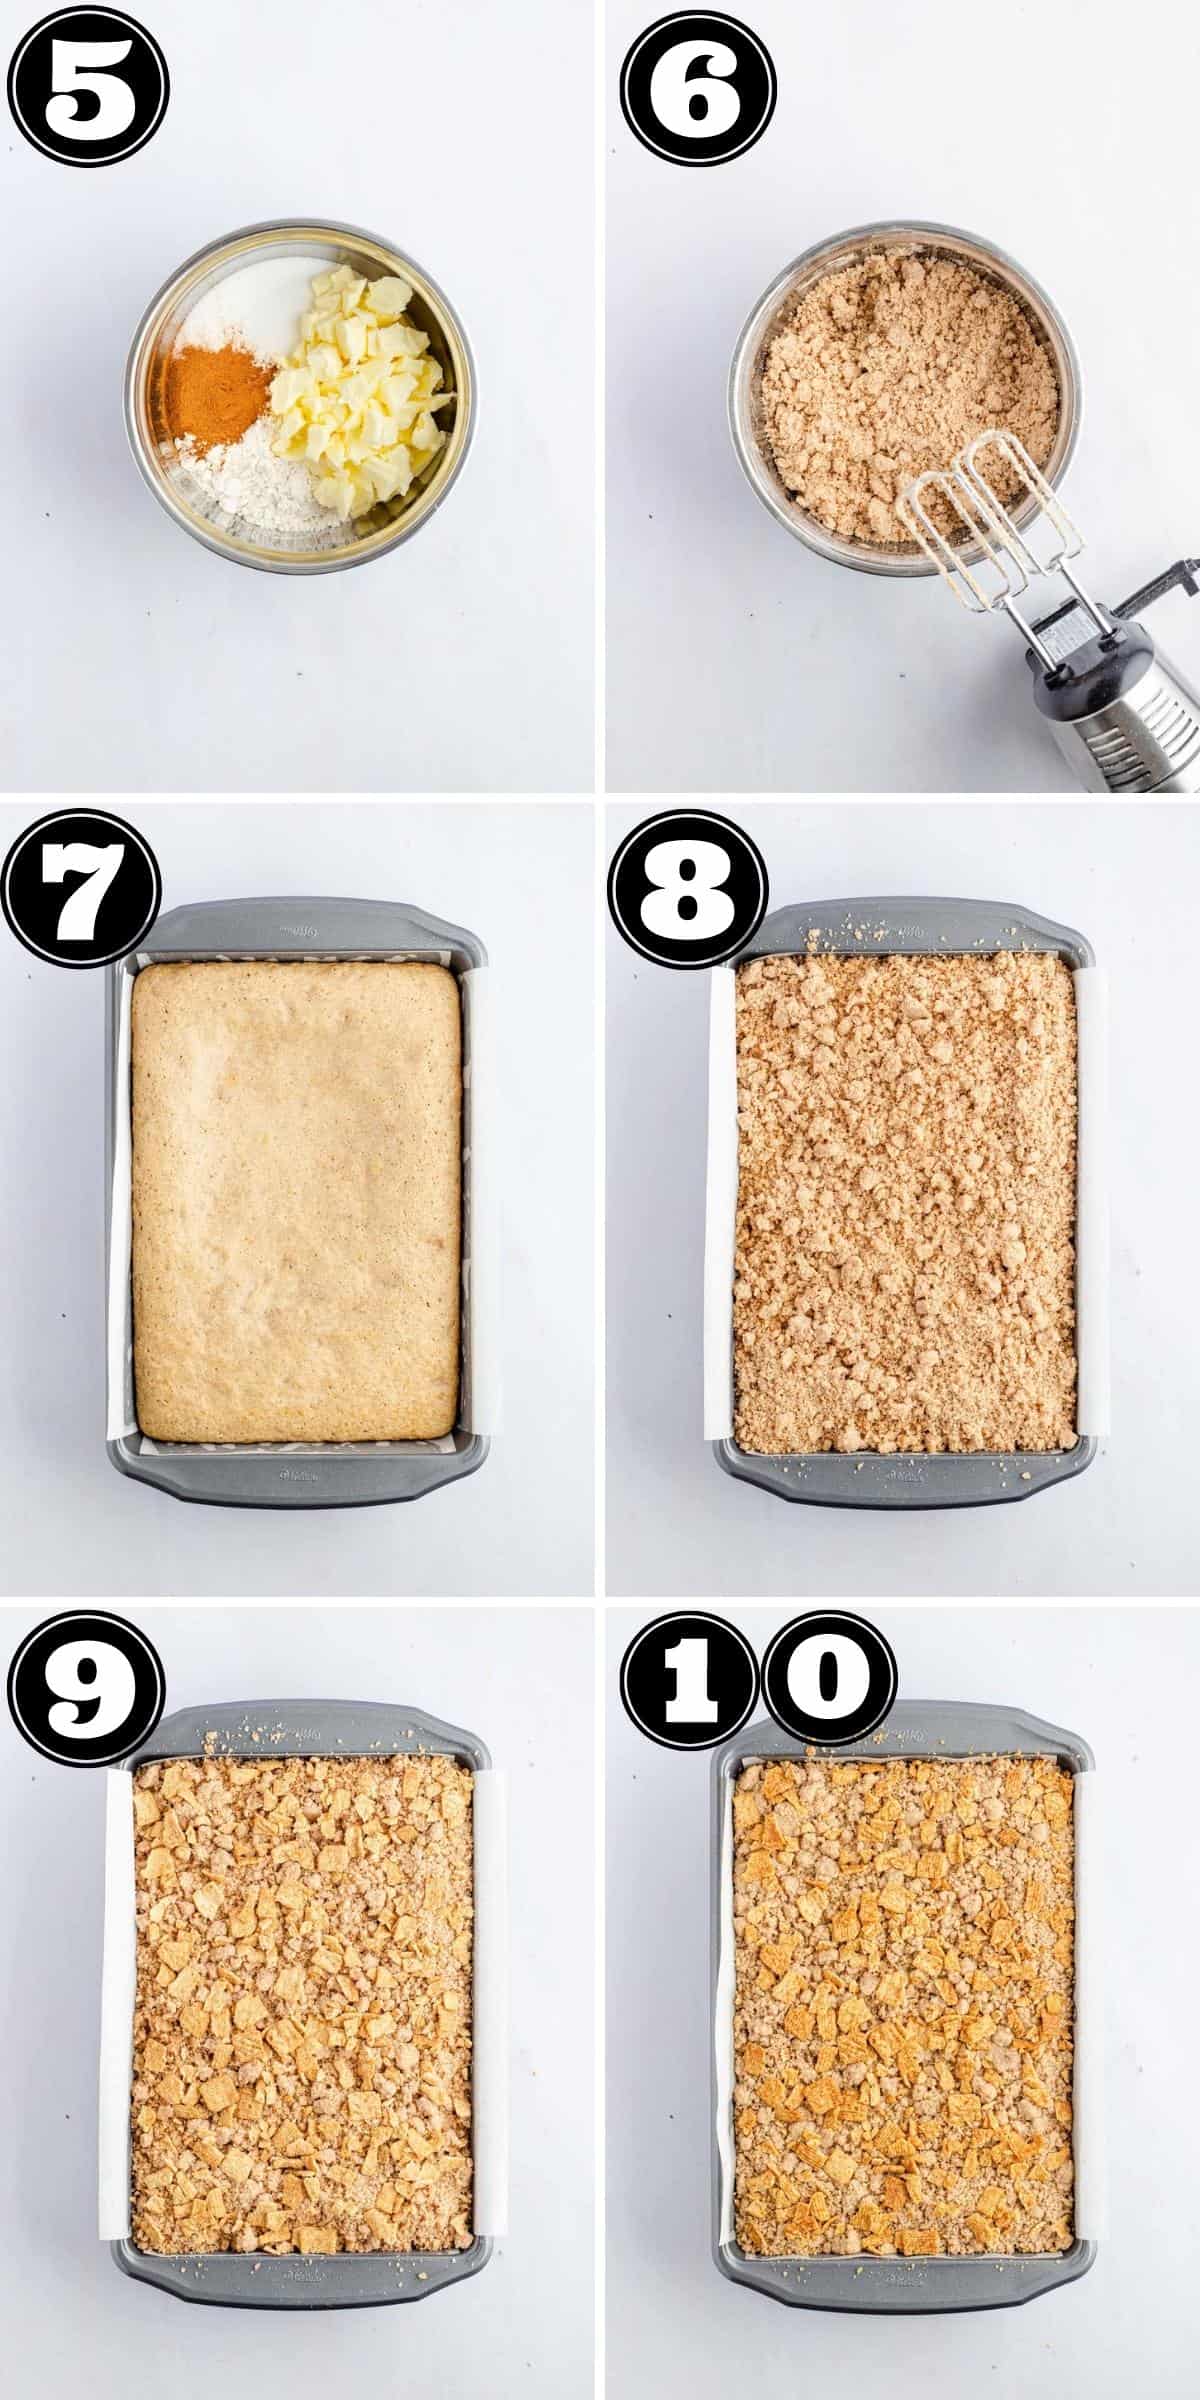 Numbered step images showing how to add topping and finish baking.